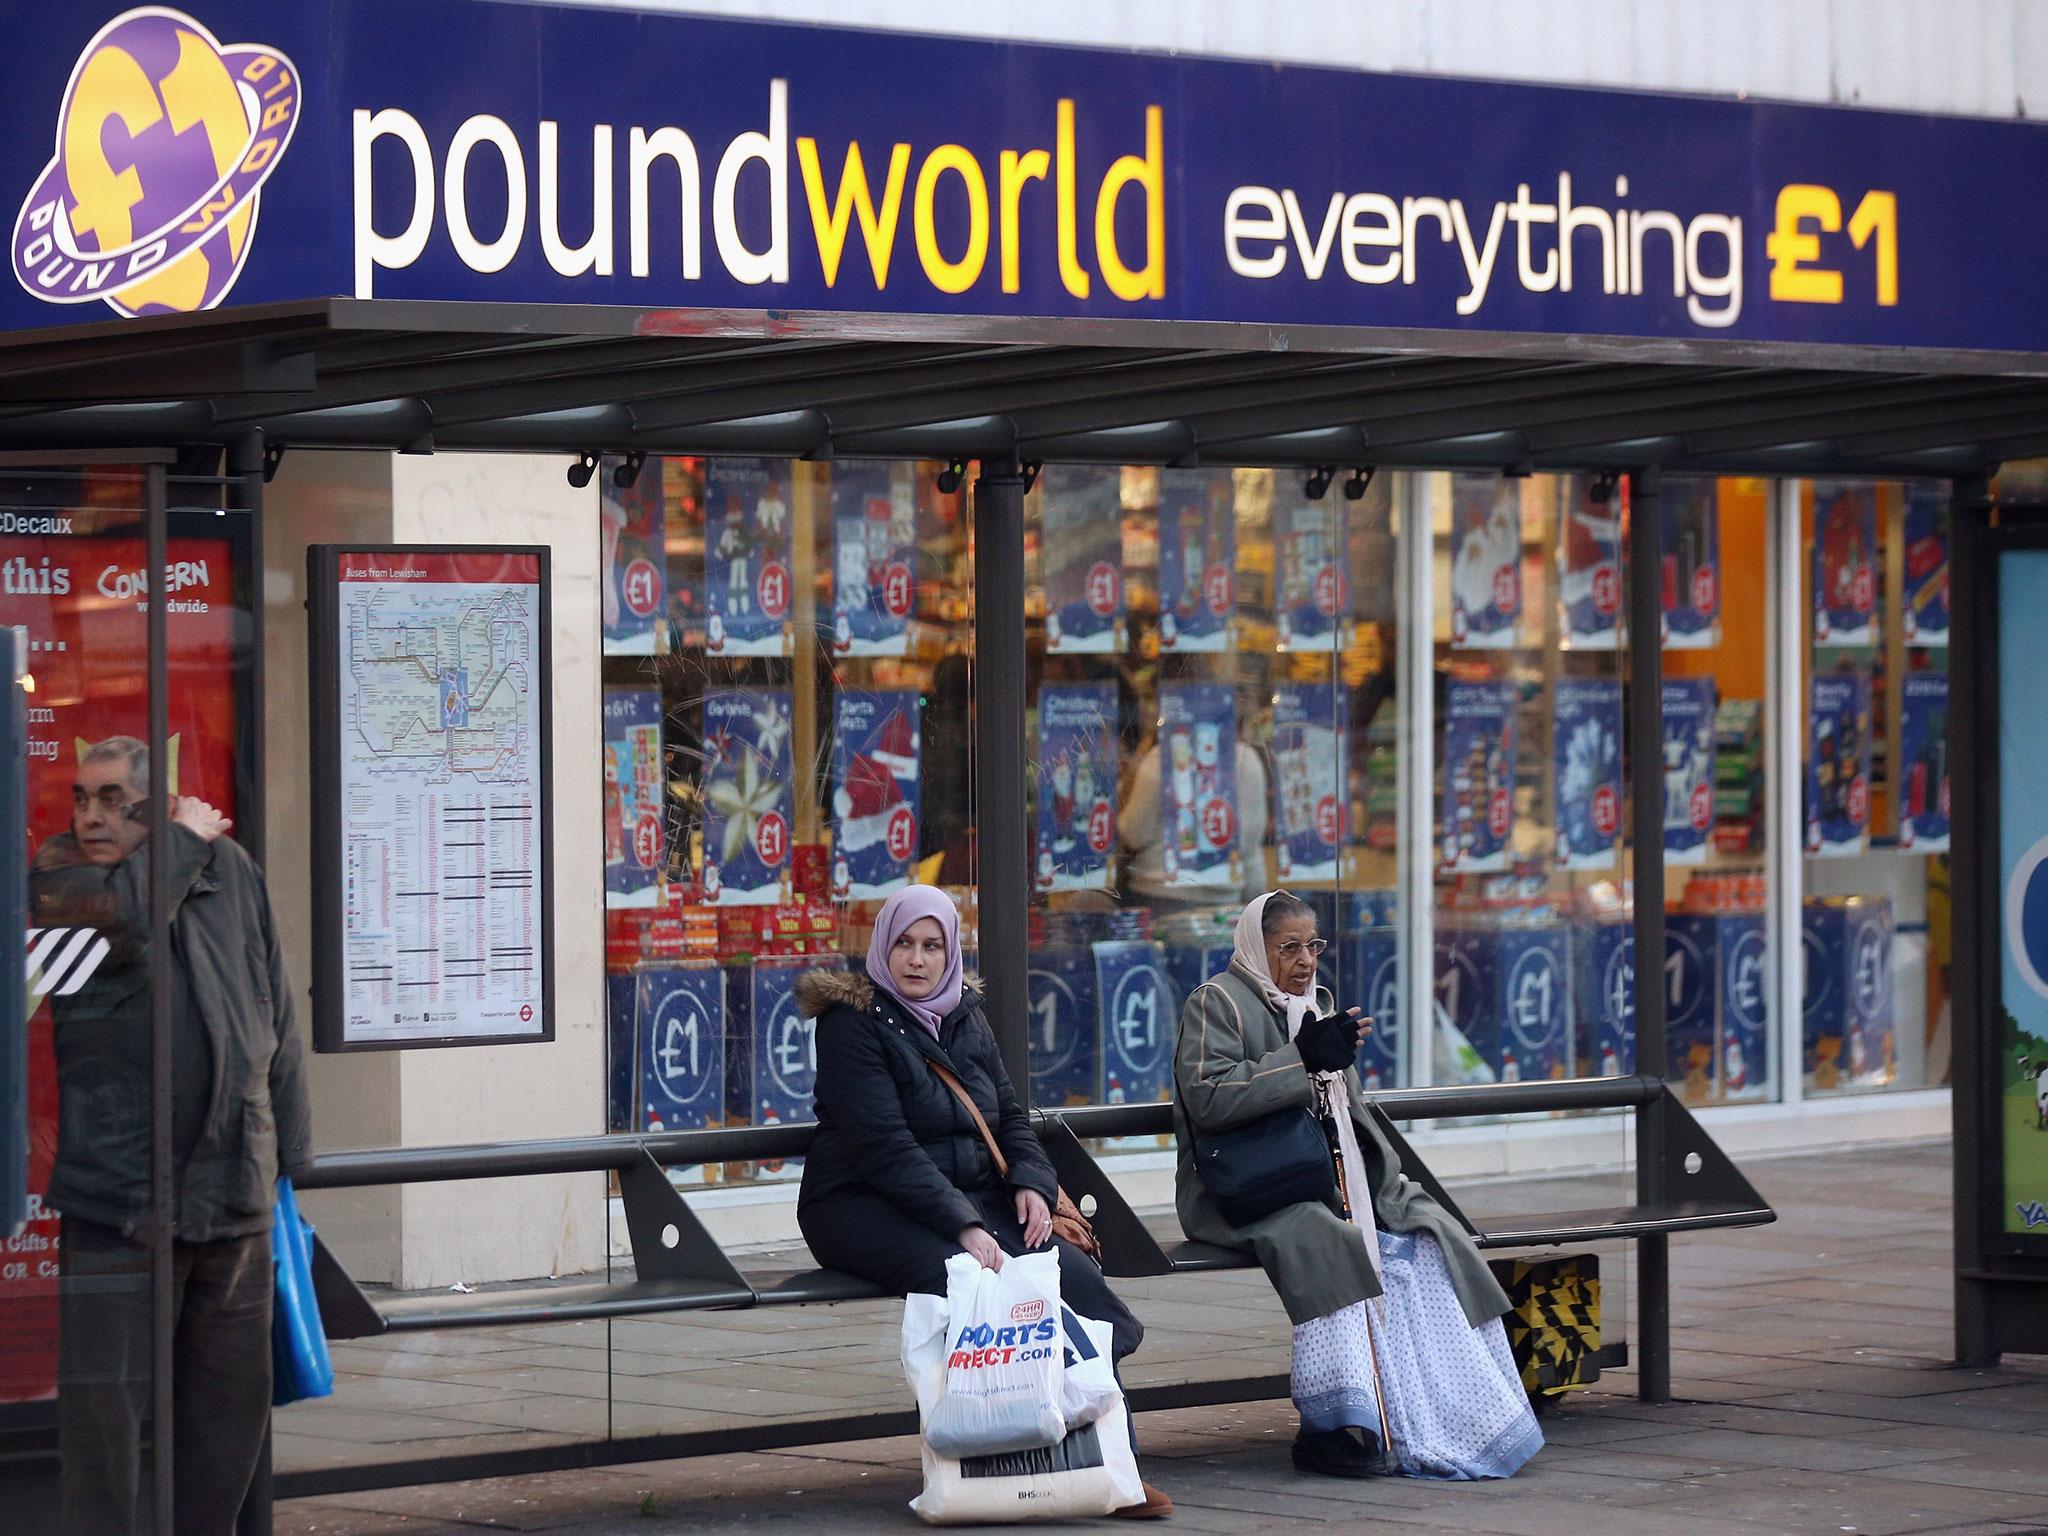 Poundworld has apologised for the incident